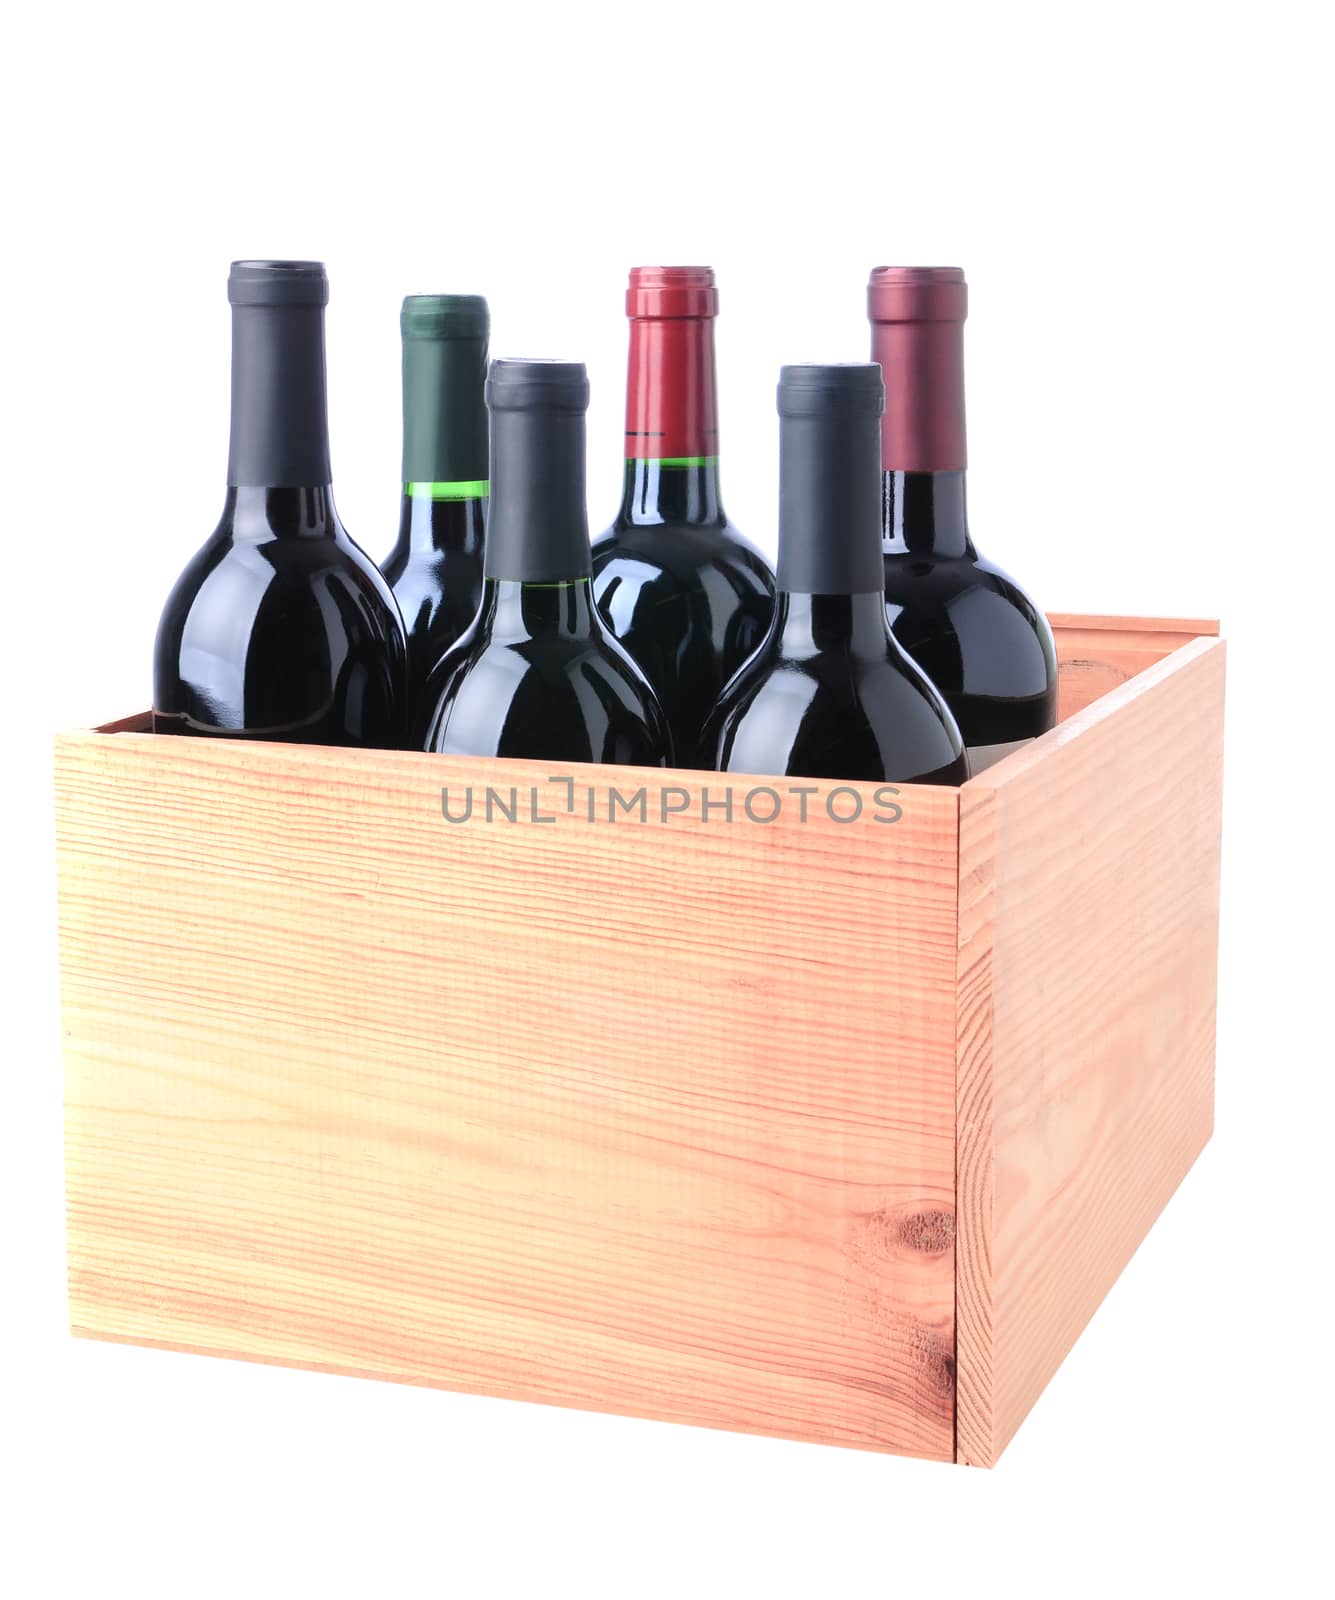 An assortment of Red Wine bottles standing in a wooden crate isolated on a white background.